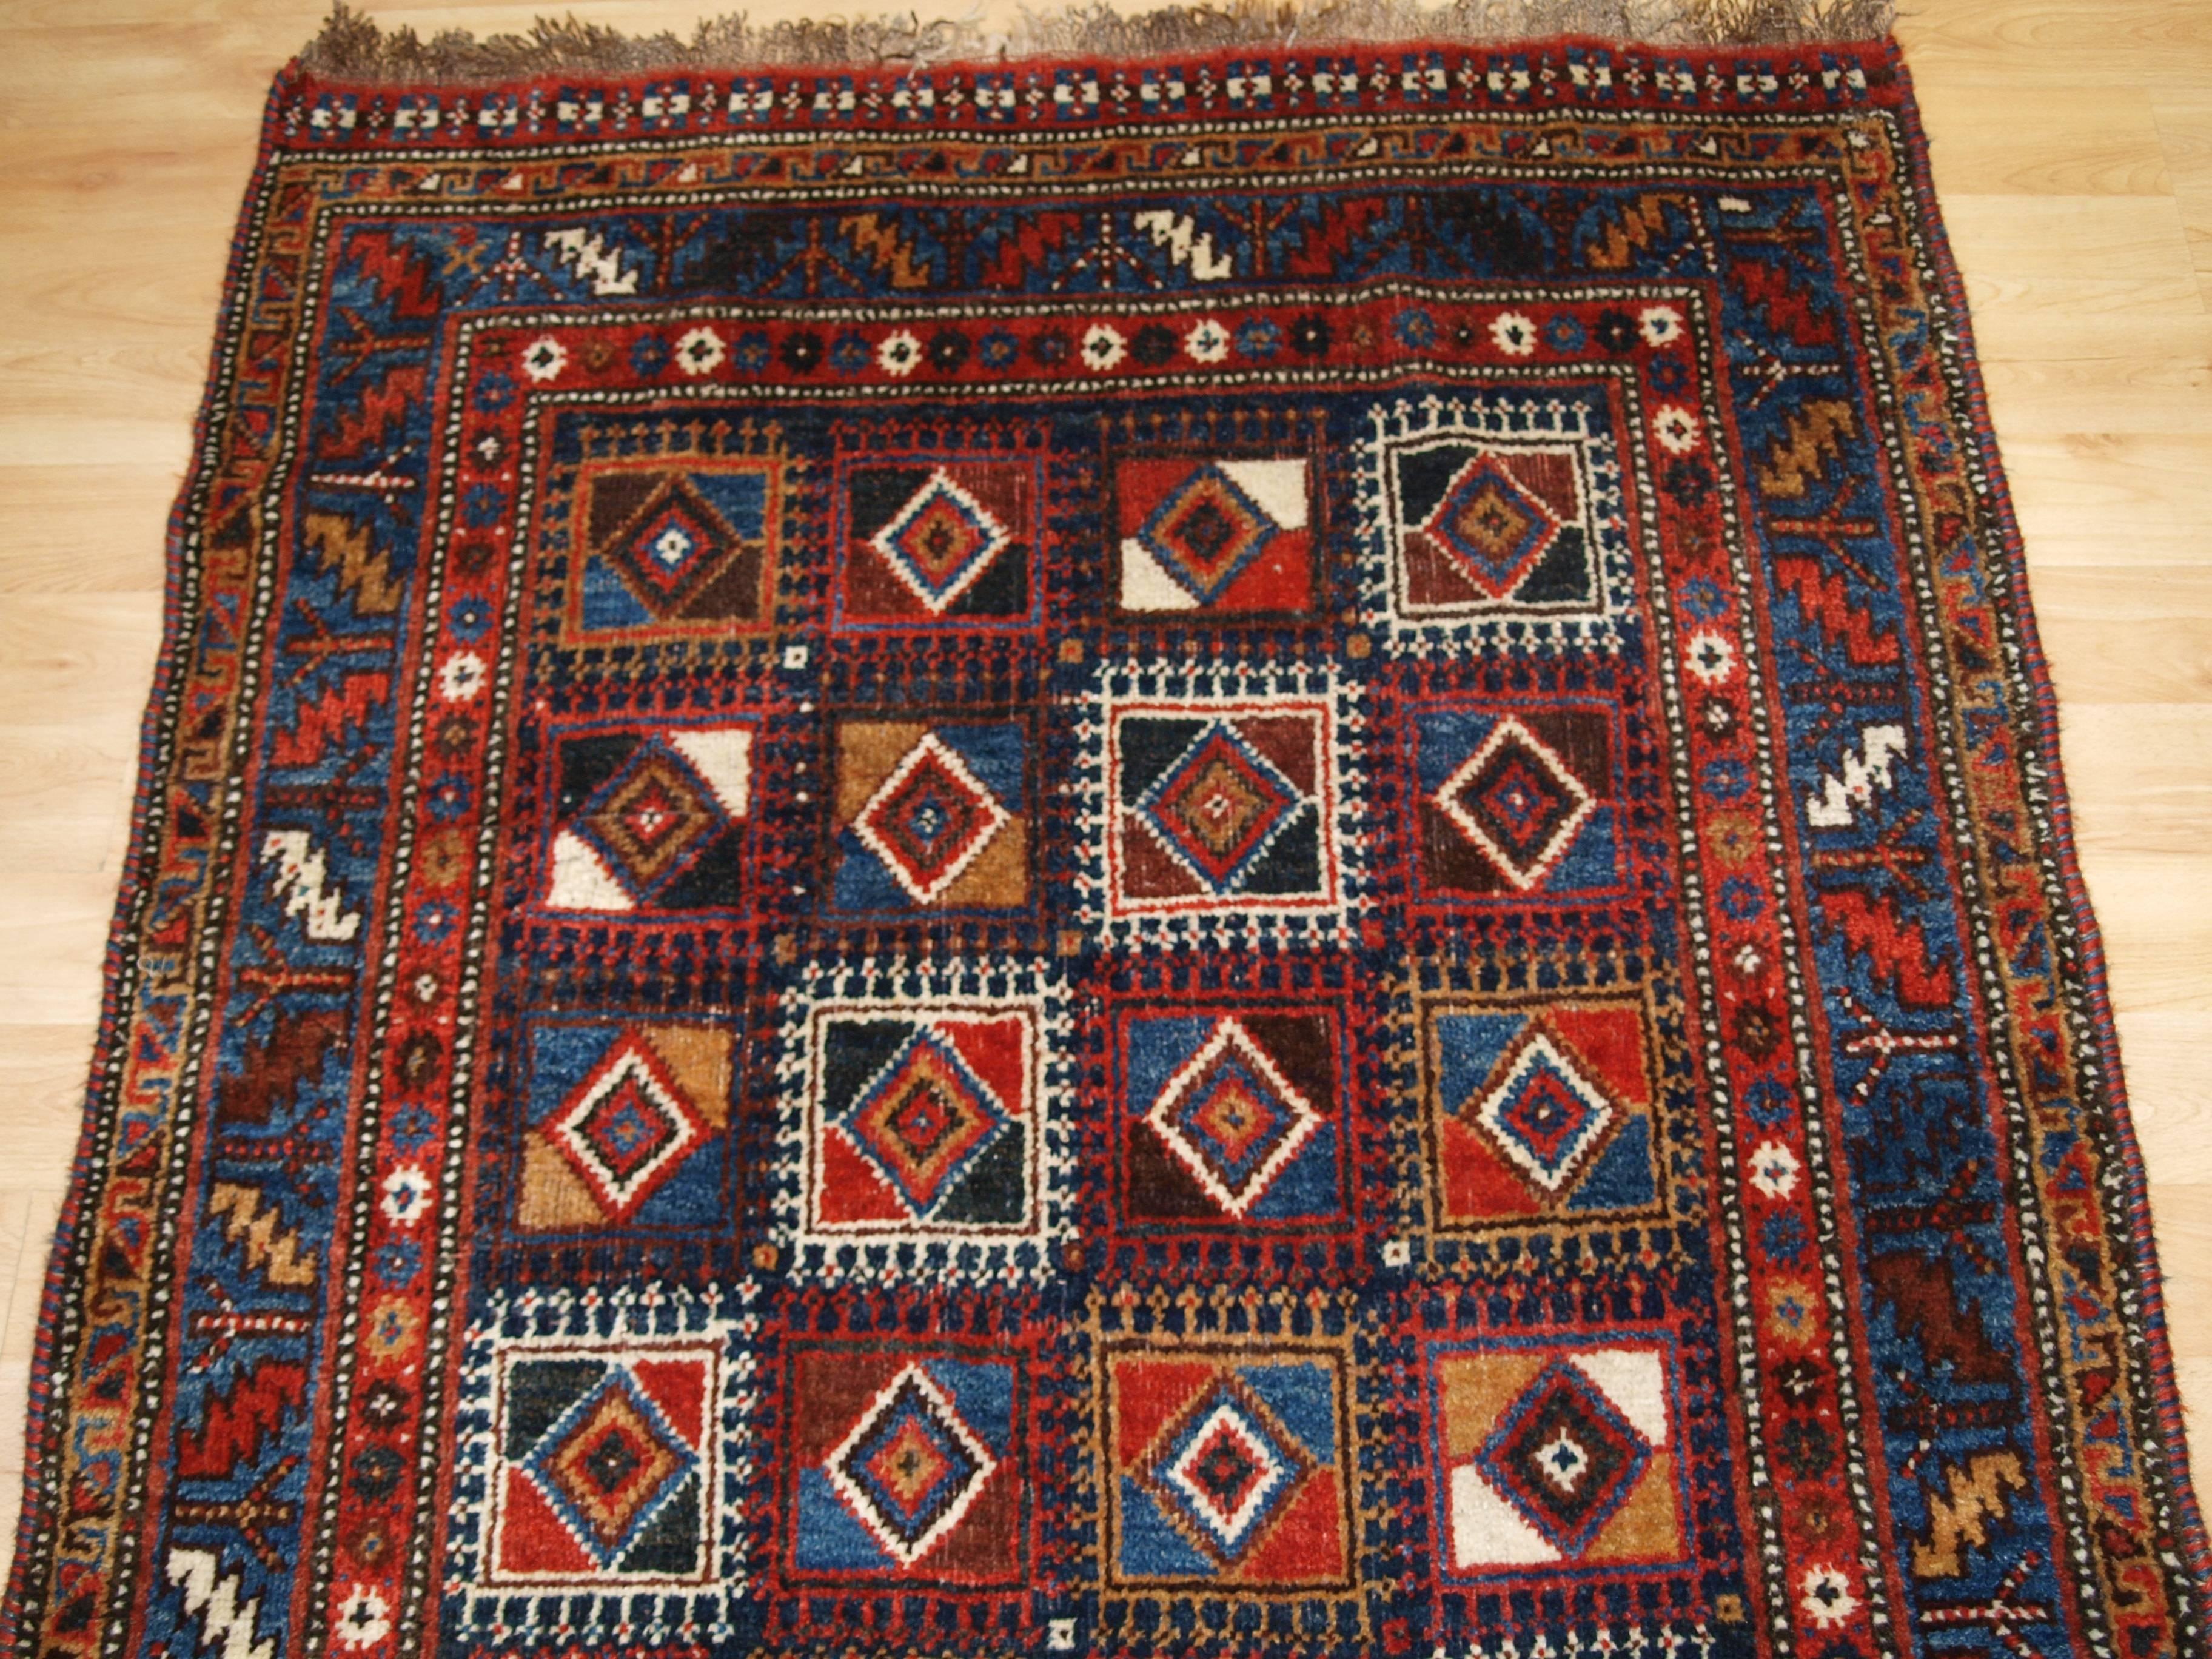 Antique Persian Qashqai long rug, very unusual design, superb condition, circa 1900-1920.
Size: 6ft 11in x 3ft 8in (210 x 112cm).

A good antique Persian Qashqai long rug, with very unusual box design usually found on kilims. 

circa